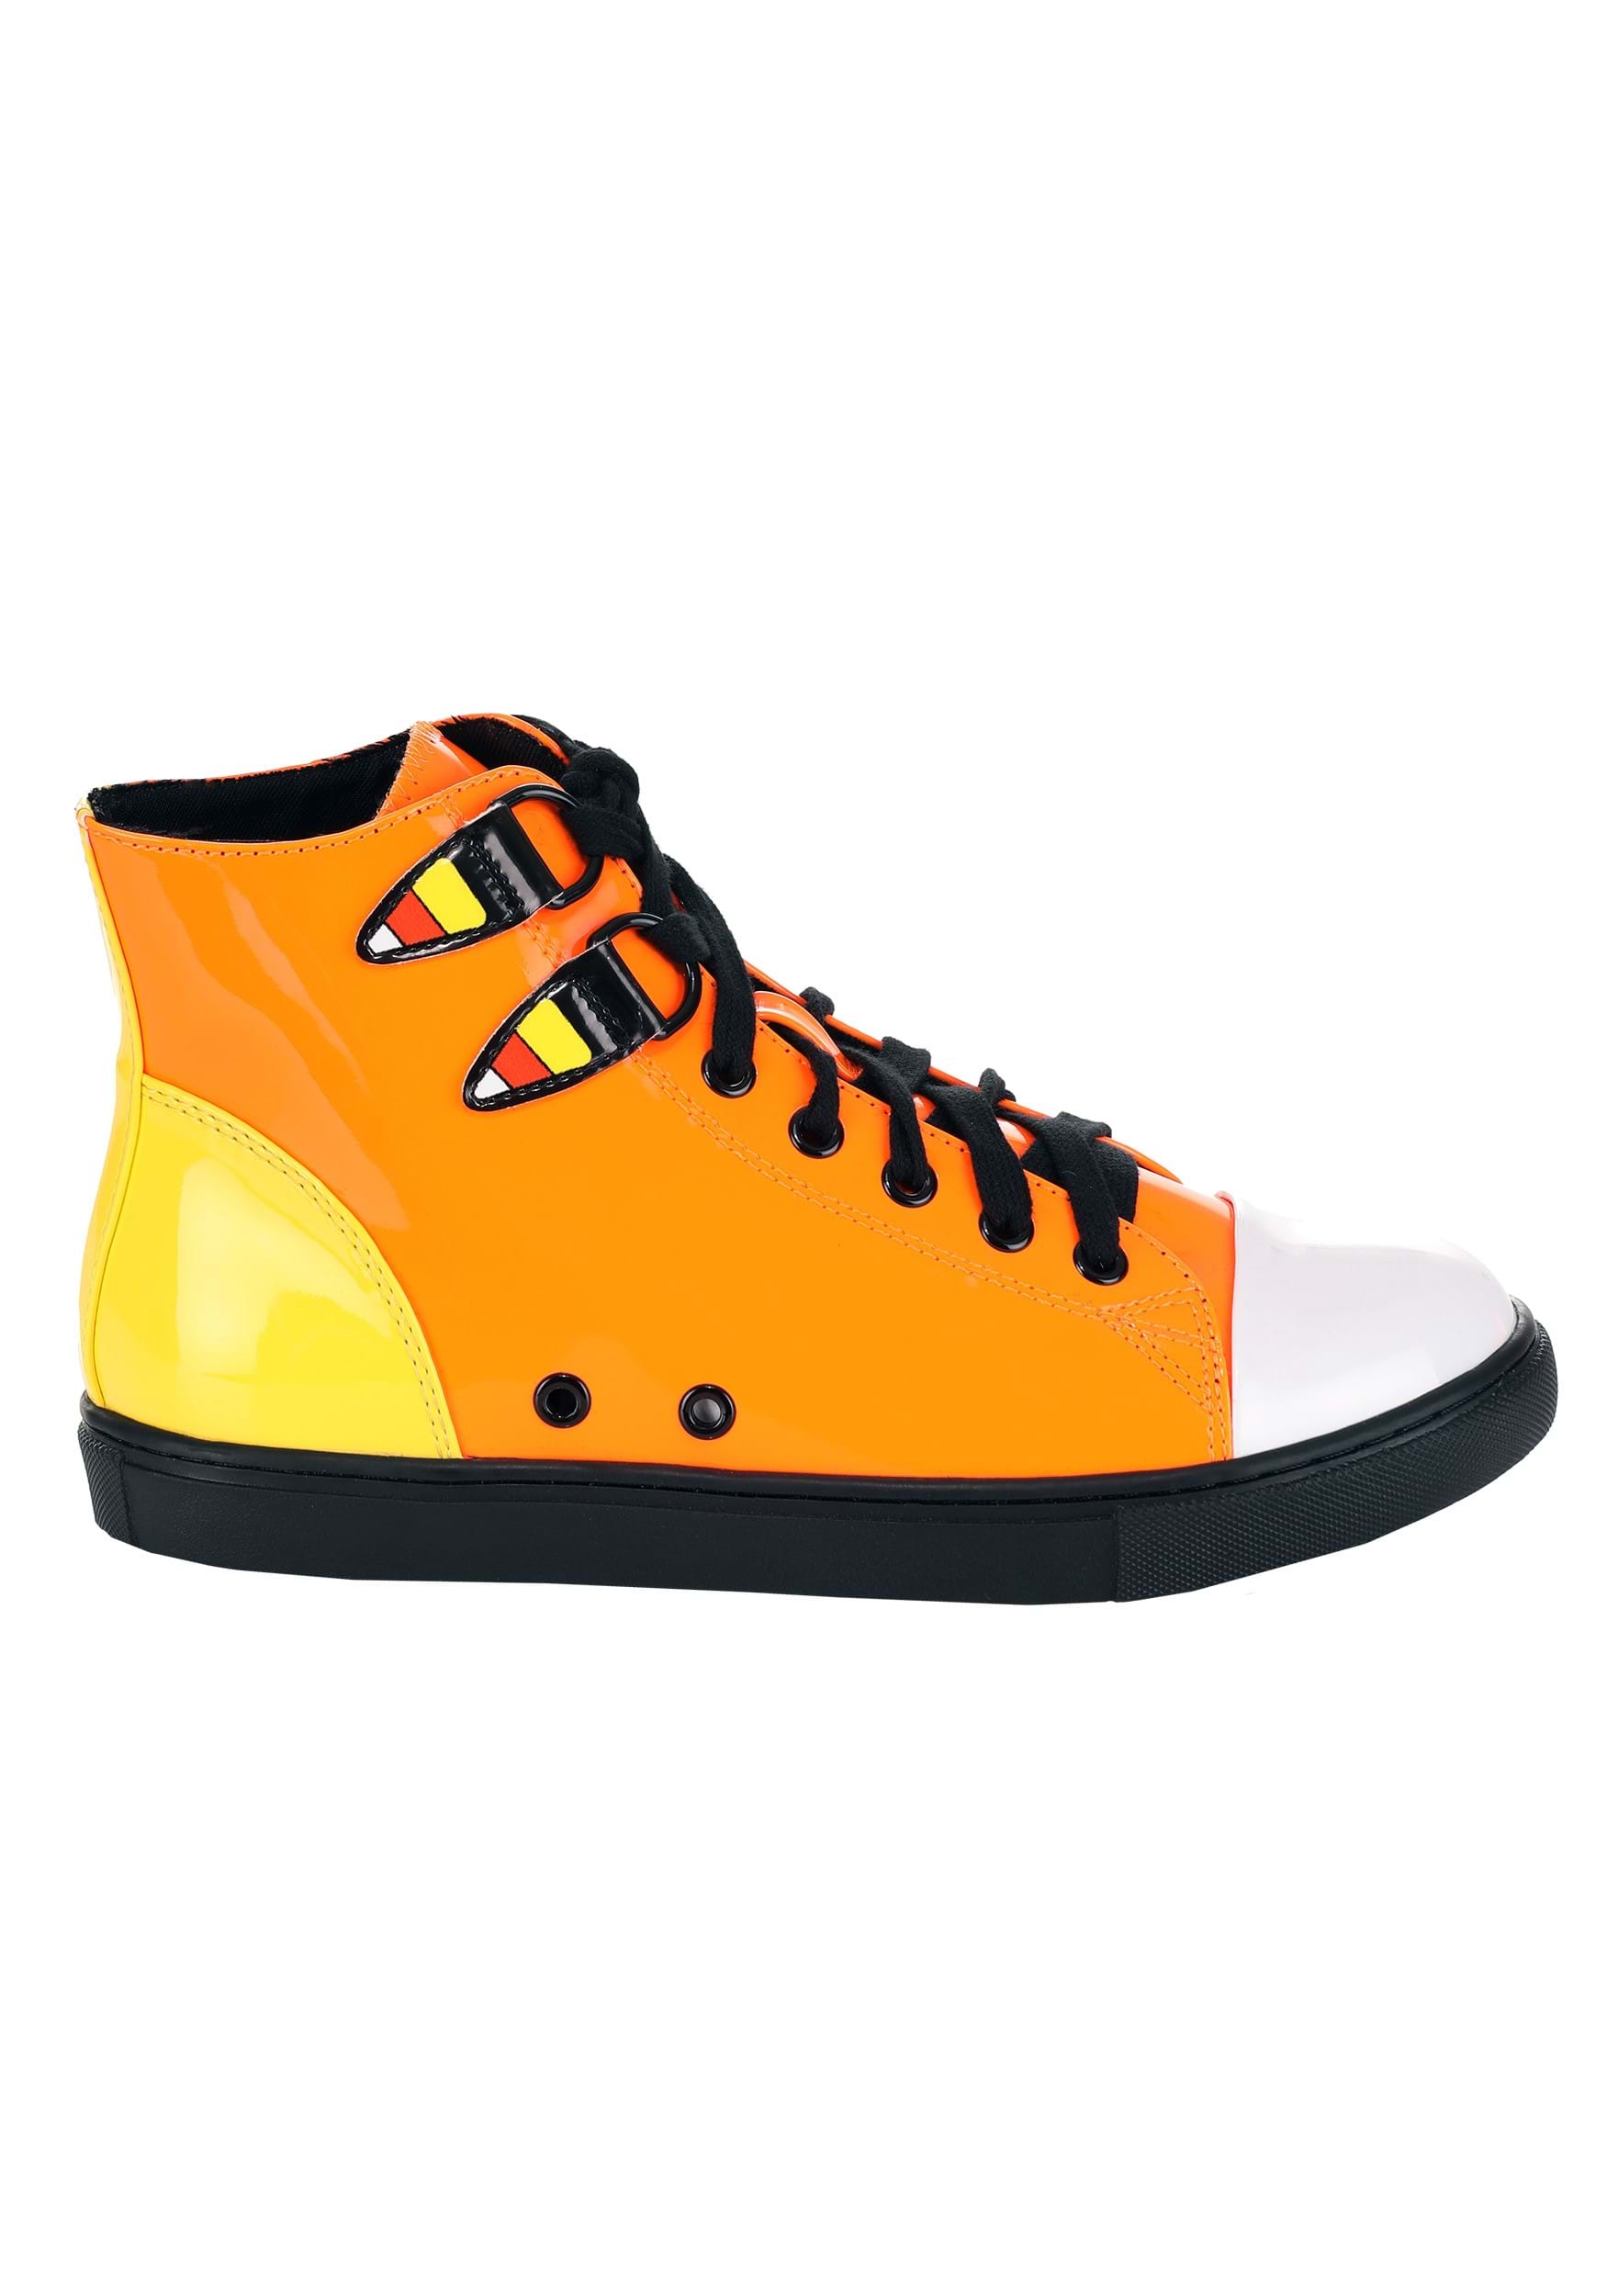 Chelsea Patent Leather Candy Corn High Top Sneakers